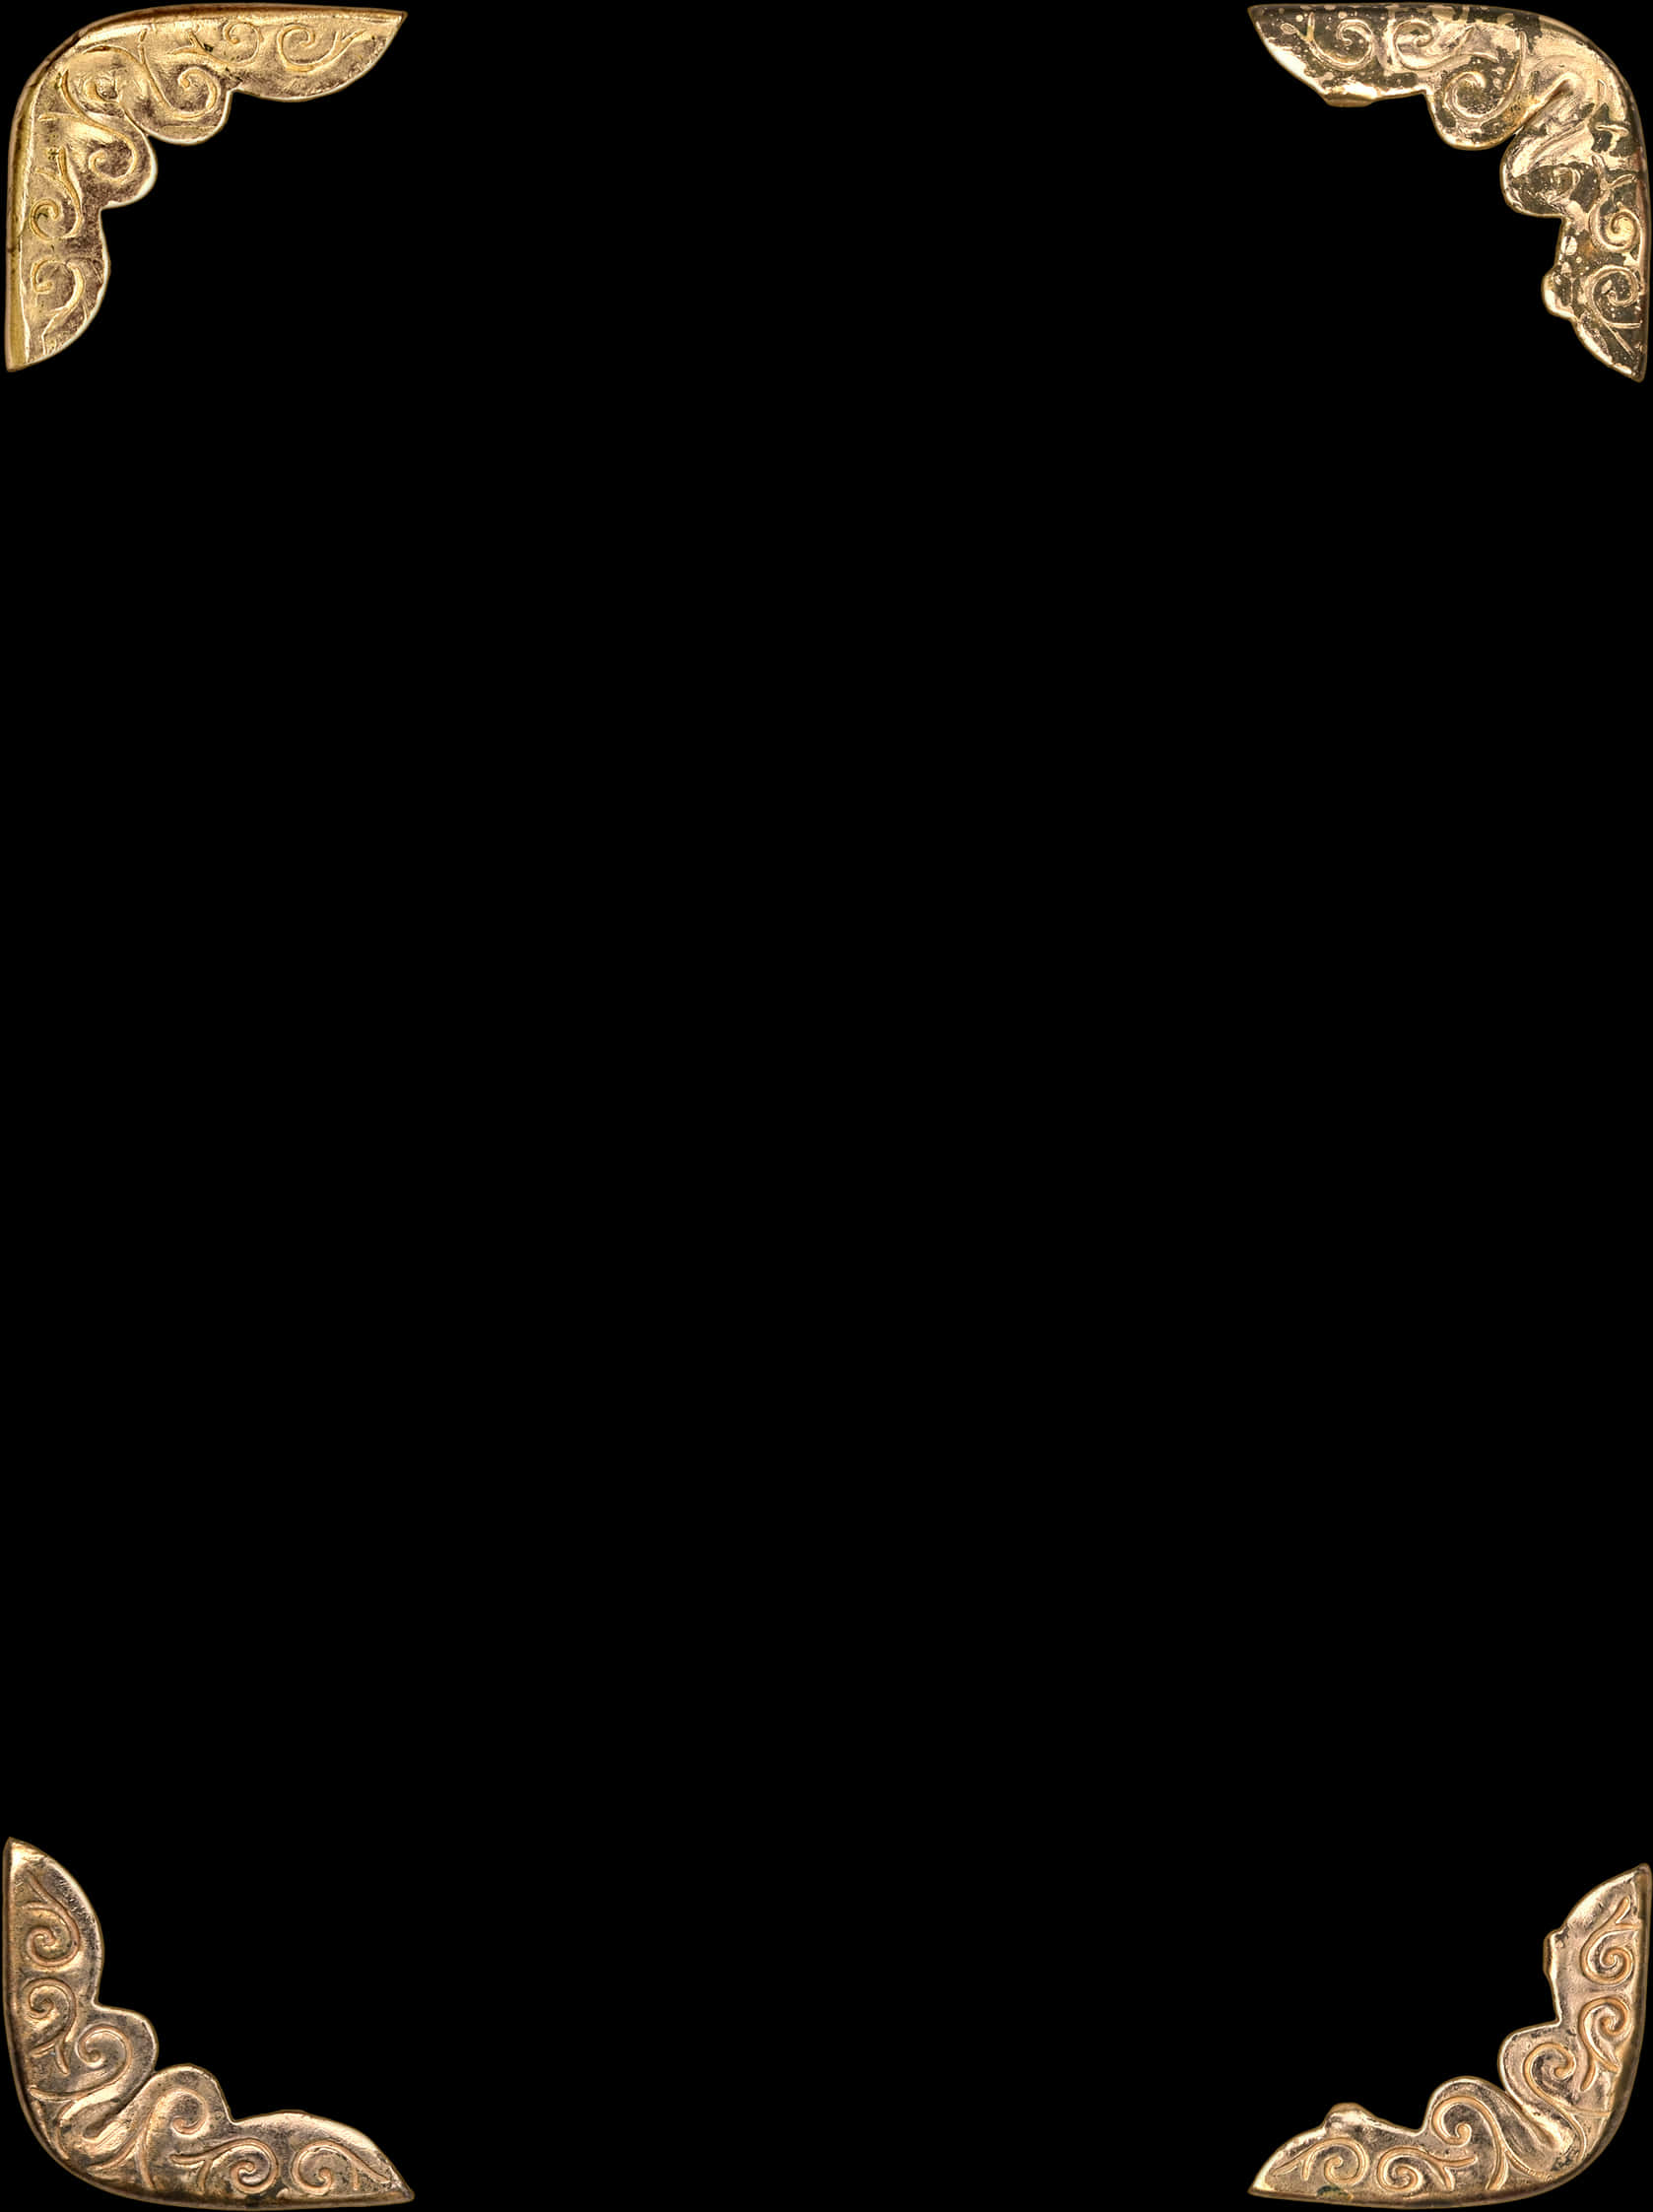 A Black Background With Gold Corners